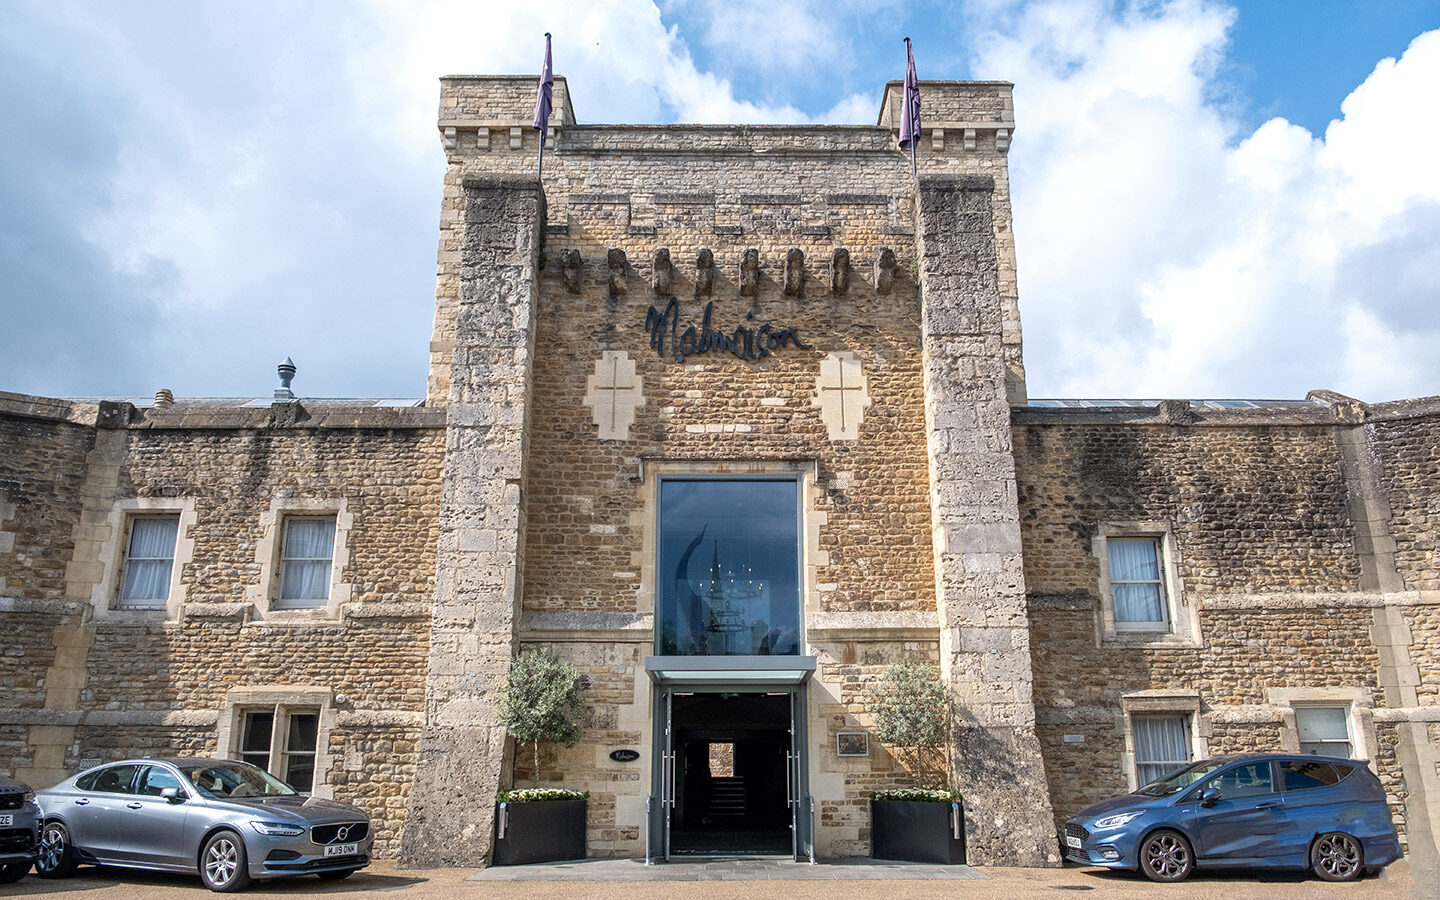 The exterior of the Malmaison Oxford hotel